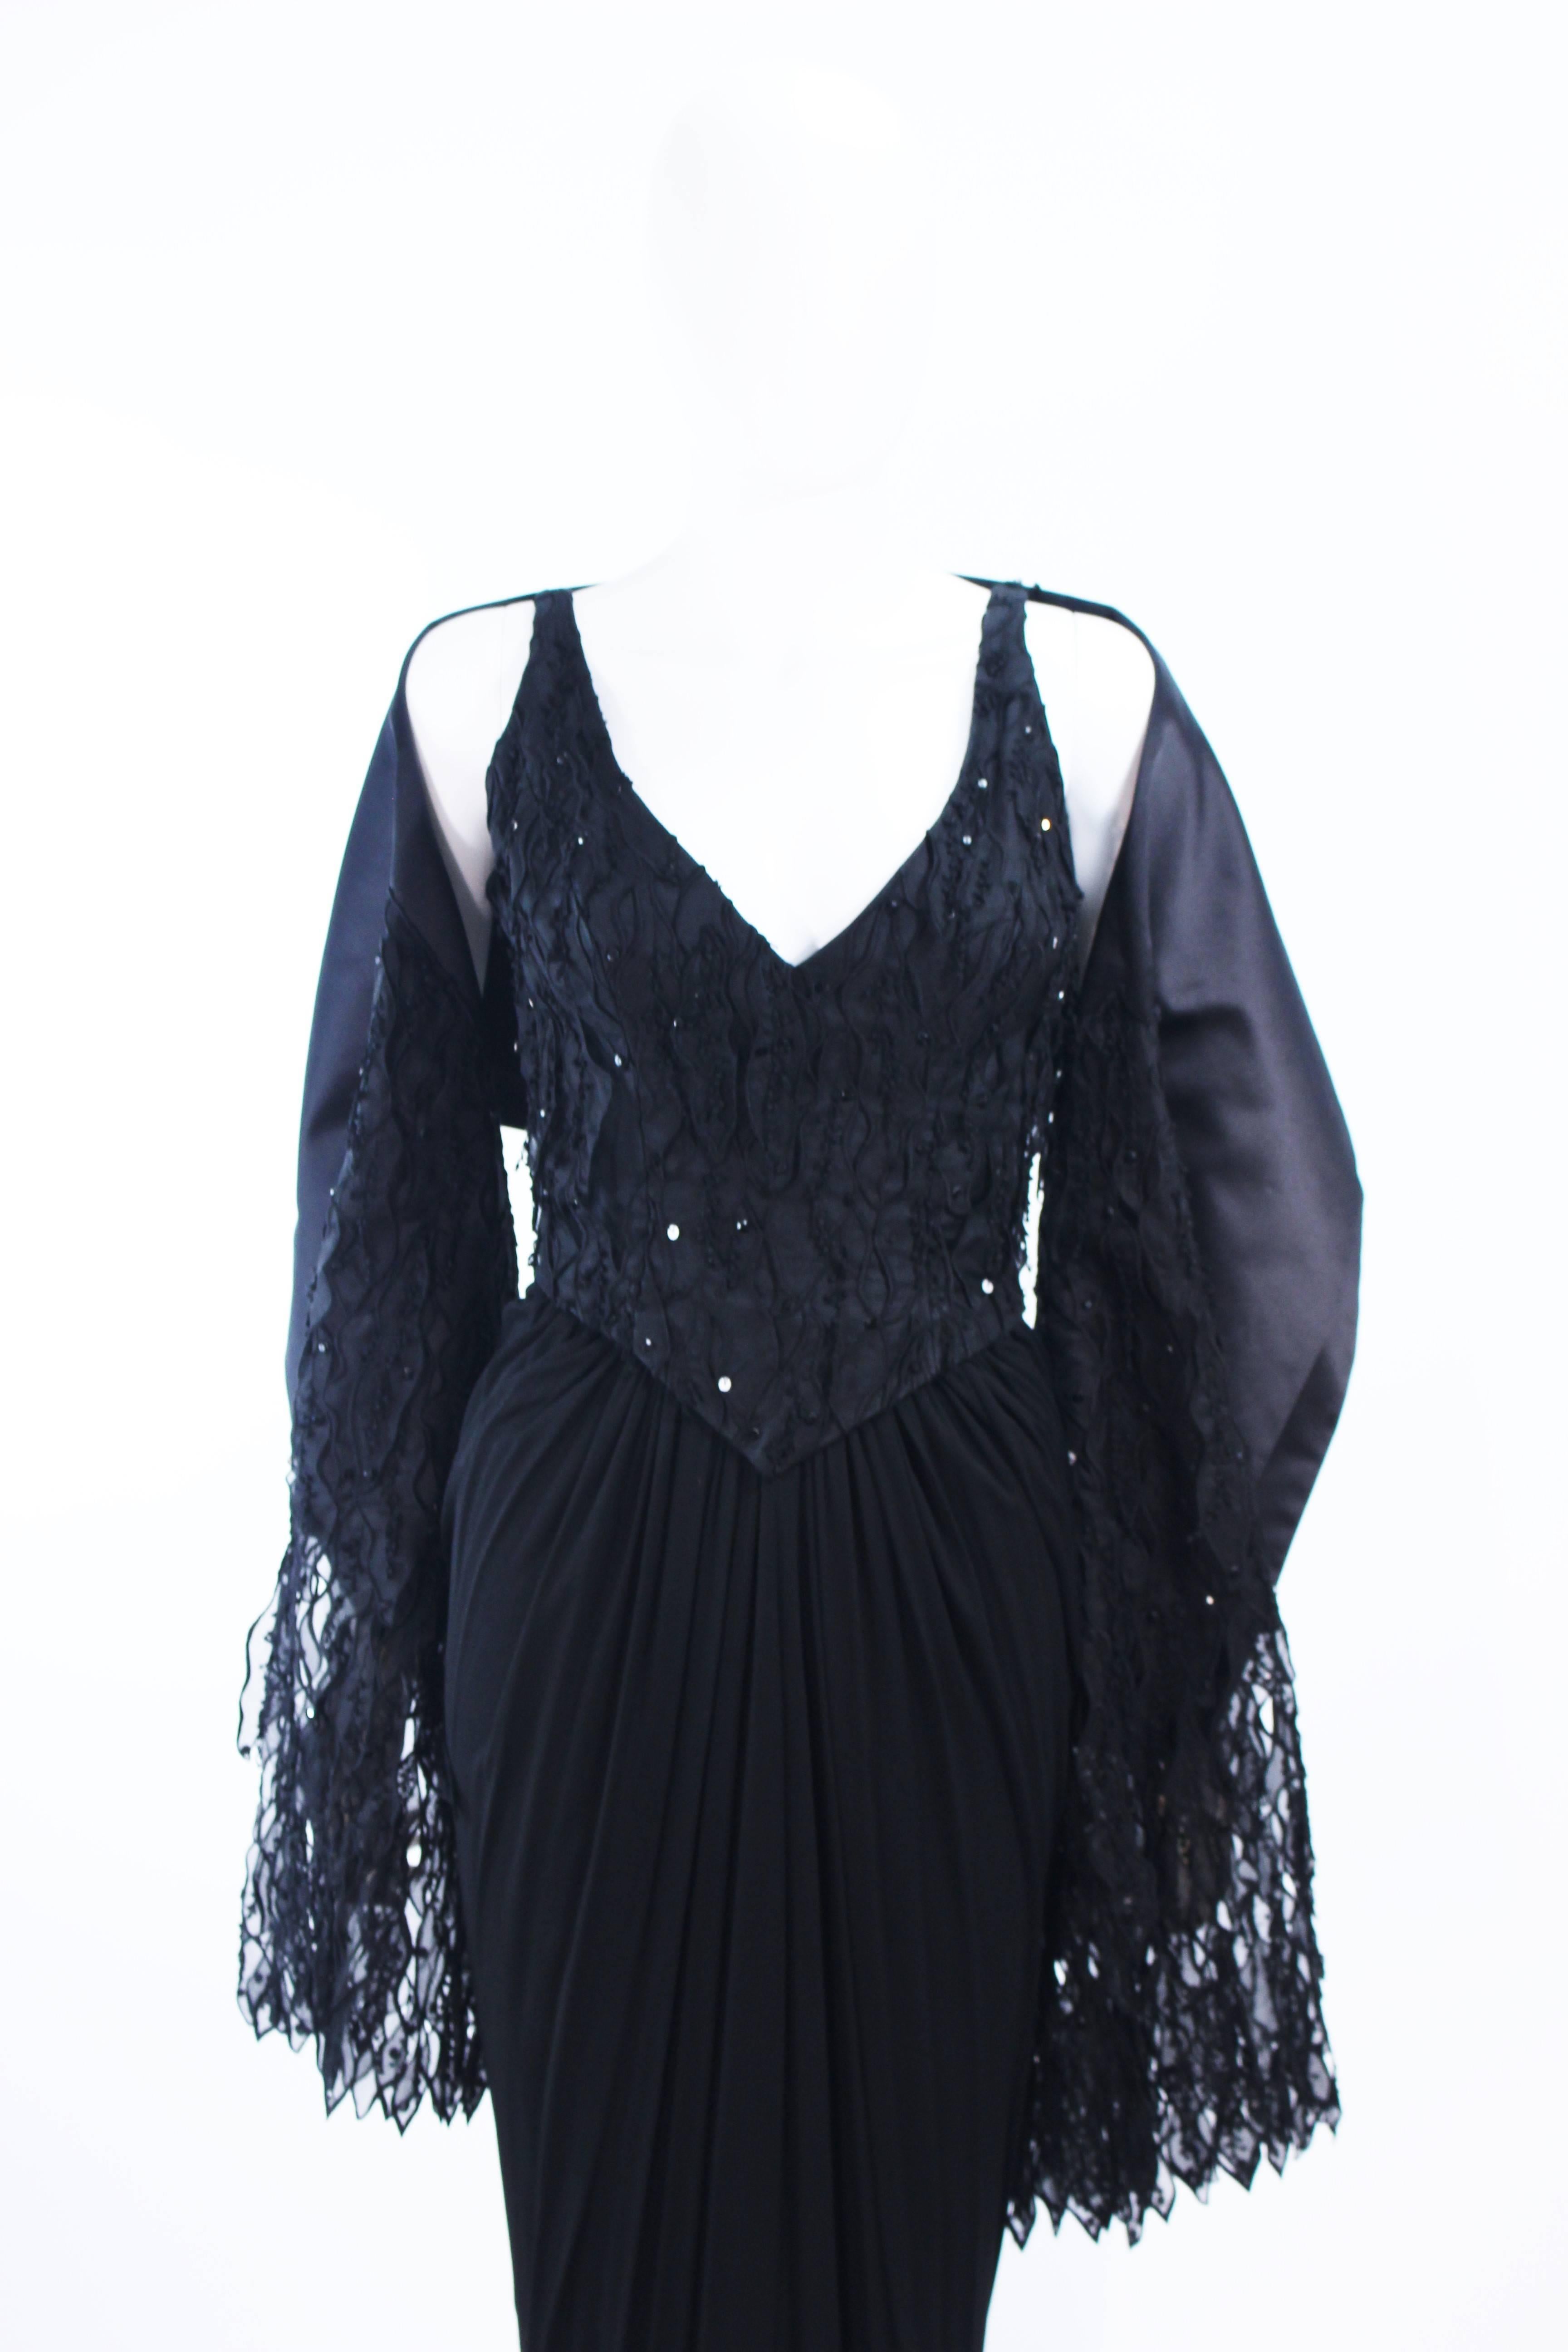 Vintage 1960's Black Silk Jersey Gown with Floral Applique & Rhinestones Size 4 In Excellent Condition For Sale In Los Angeles, CA